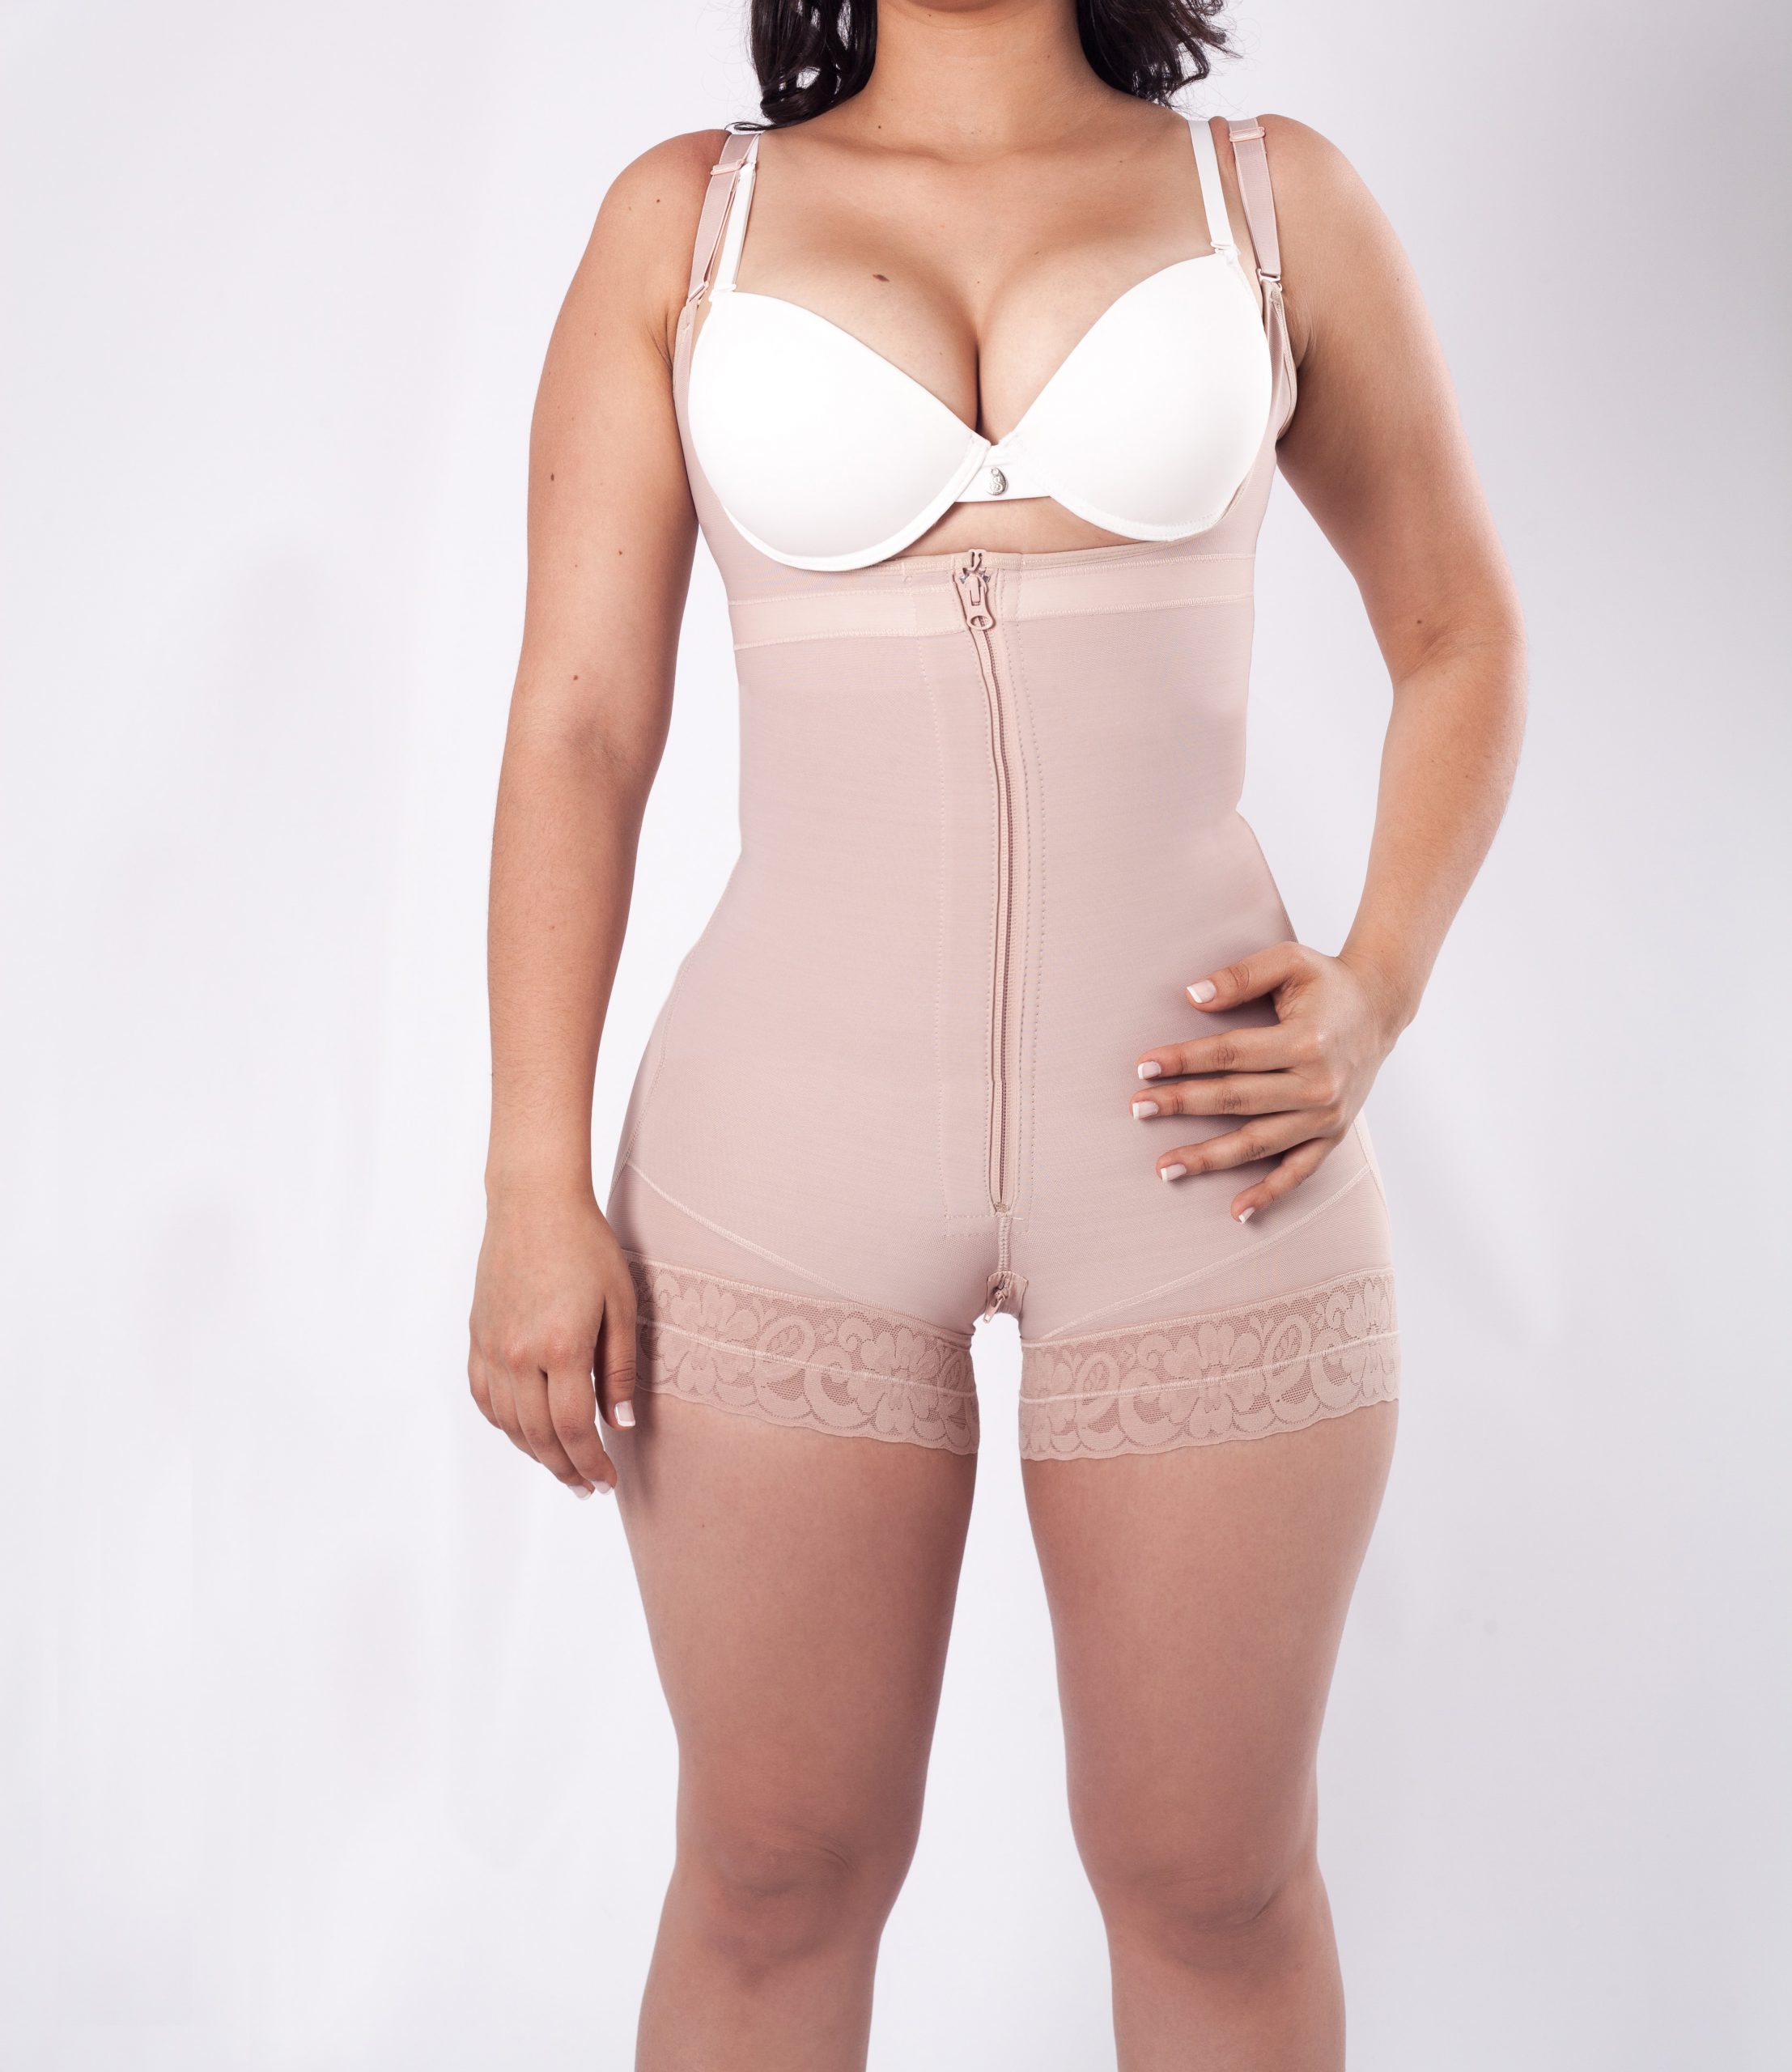 Wearing Daily Shapewear After Gastric Bypass